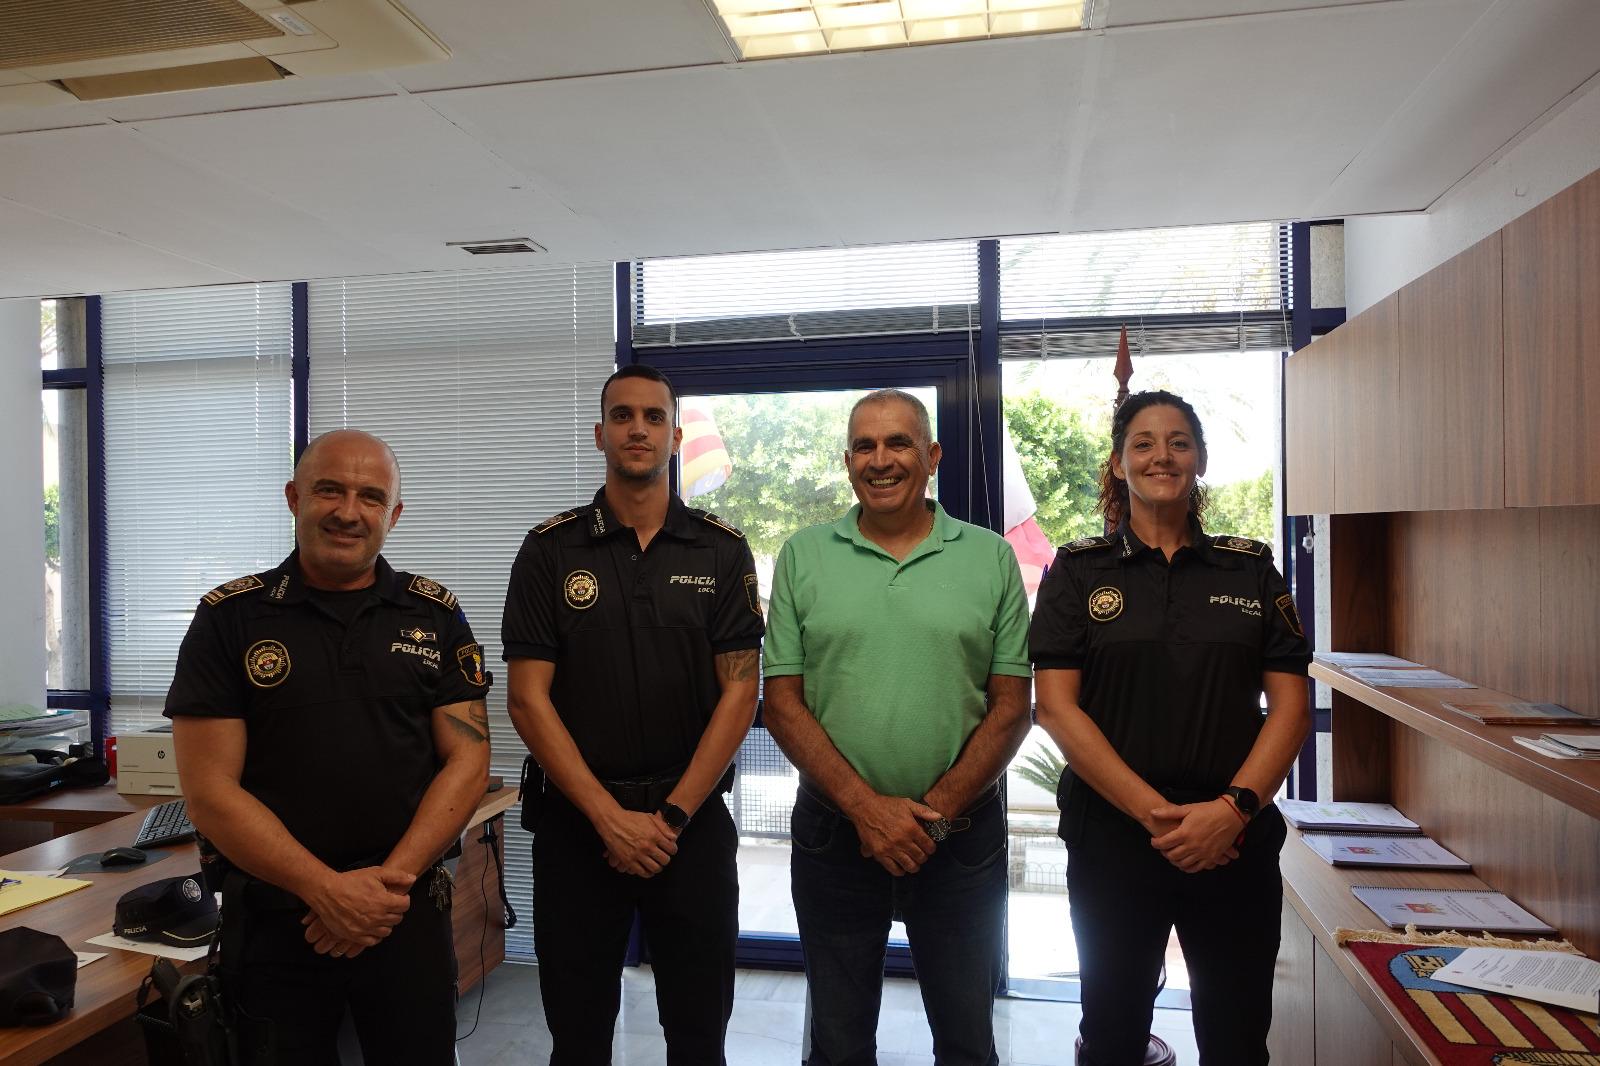 The City Council of San Fulgencio incorporates two new officers to the staff of its Local Police